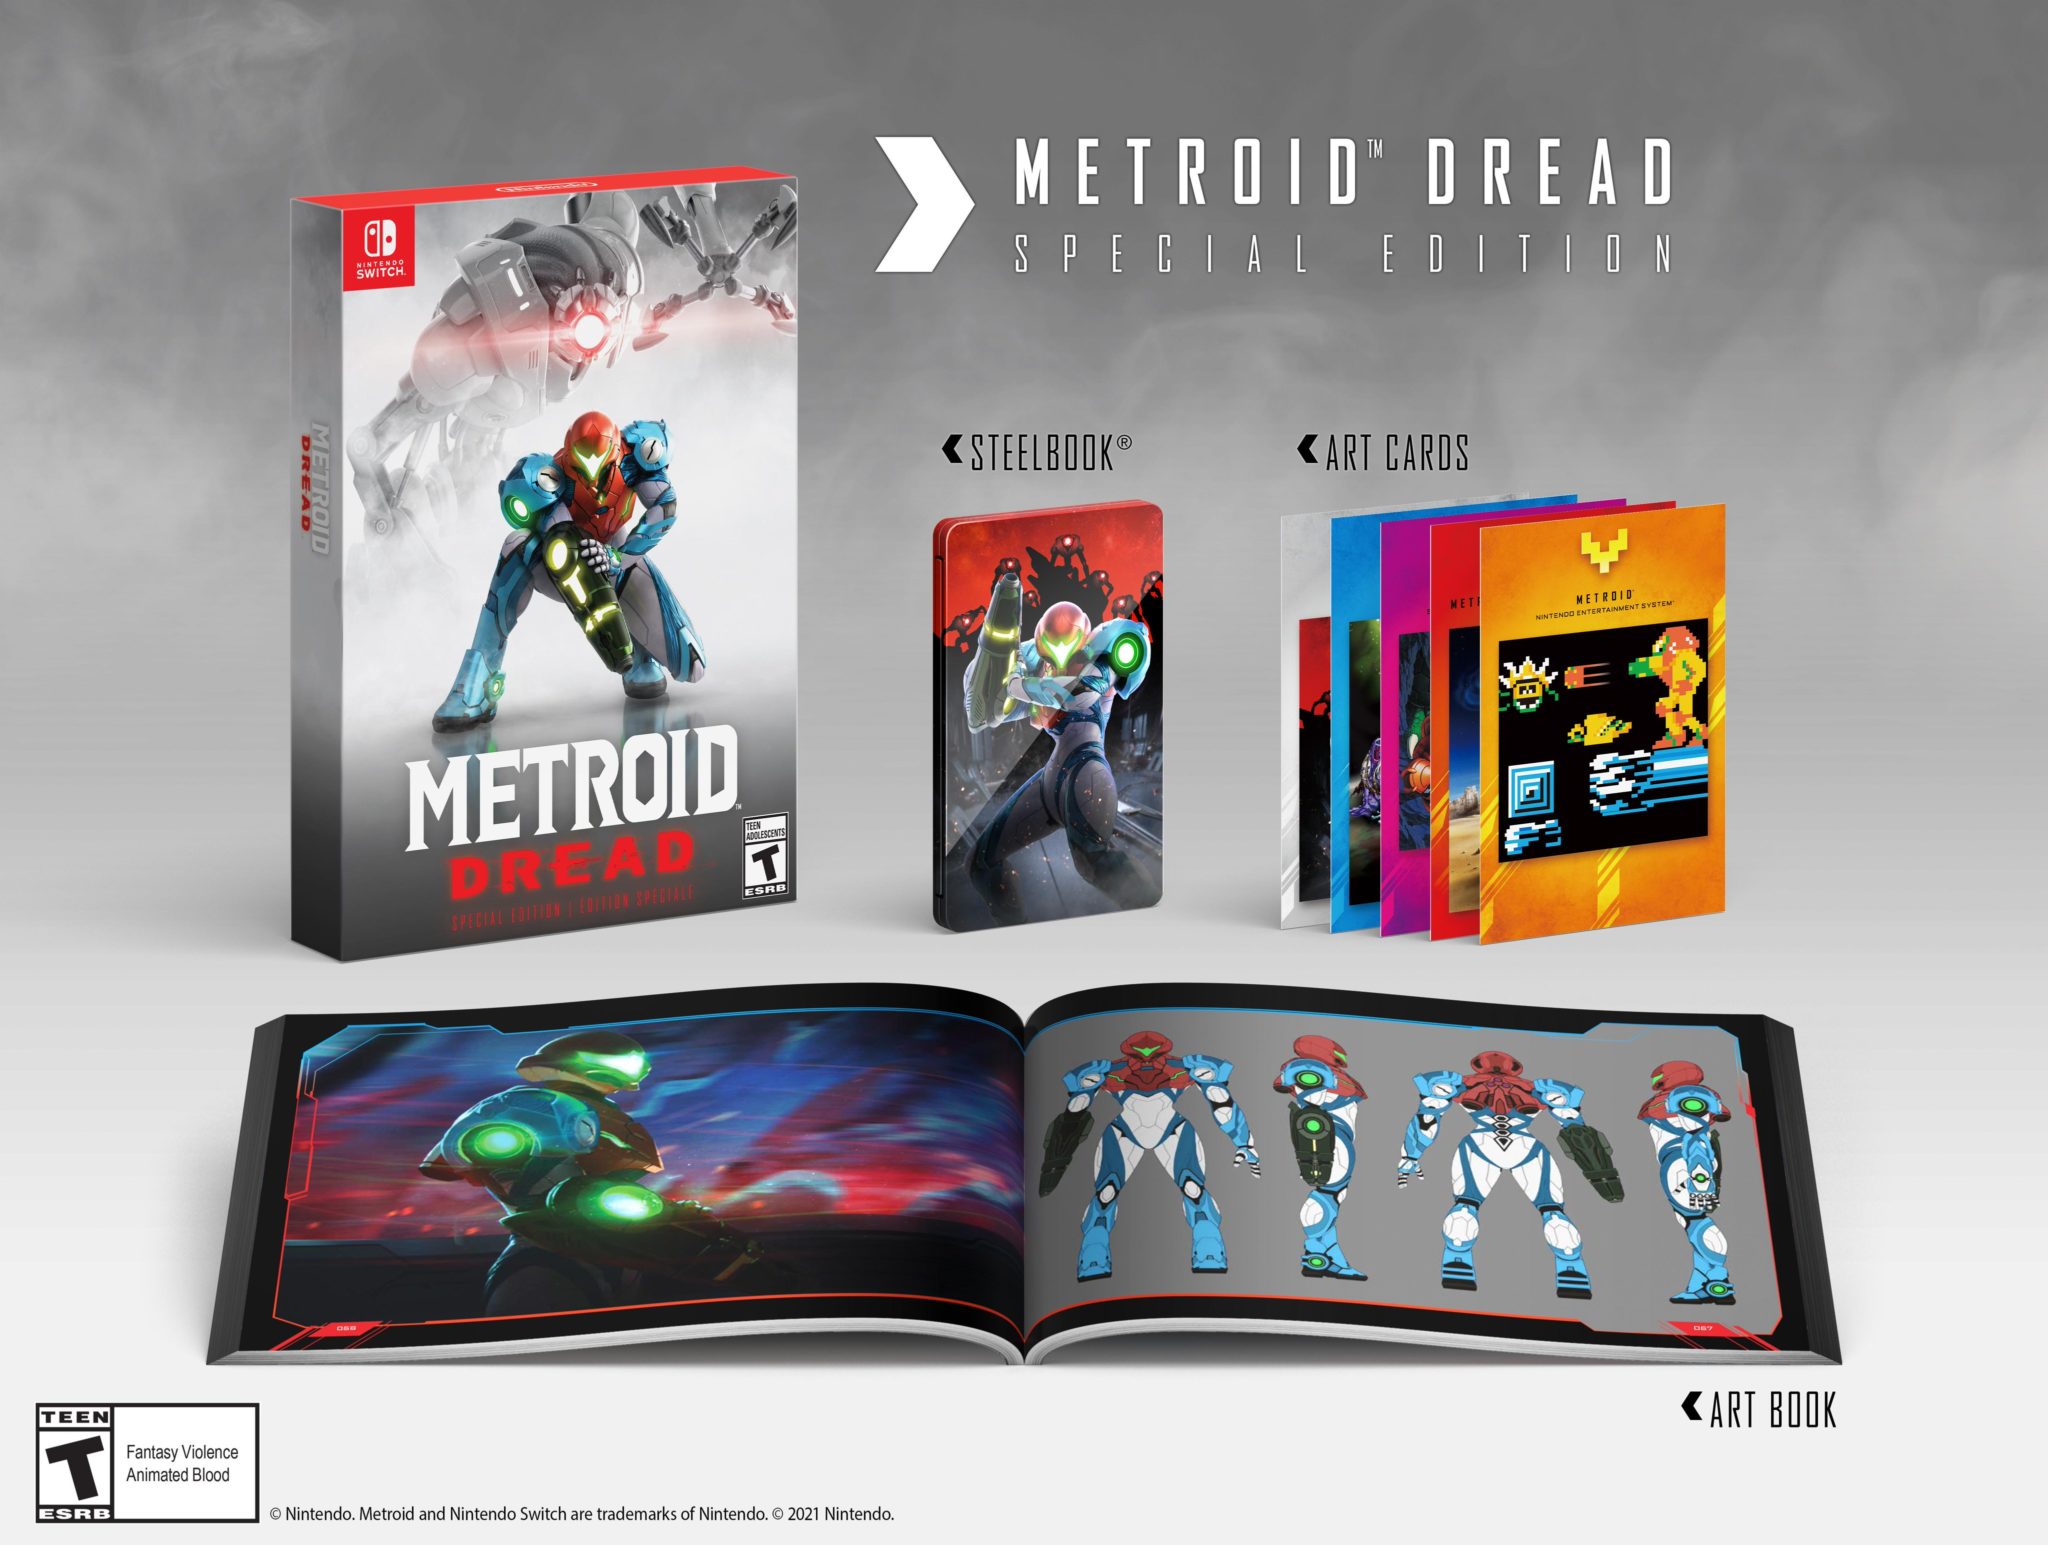 Nintendo announces brand-new Metroid Dread for Switch game